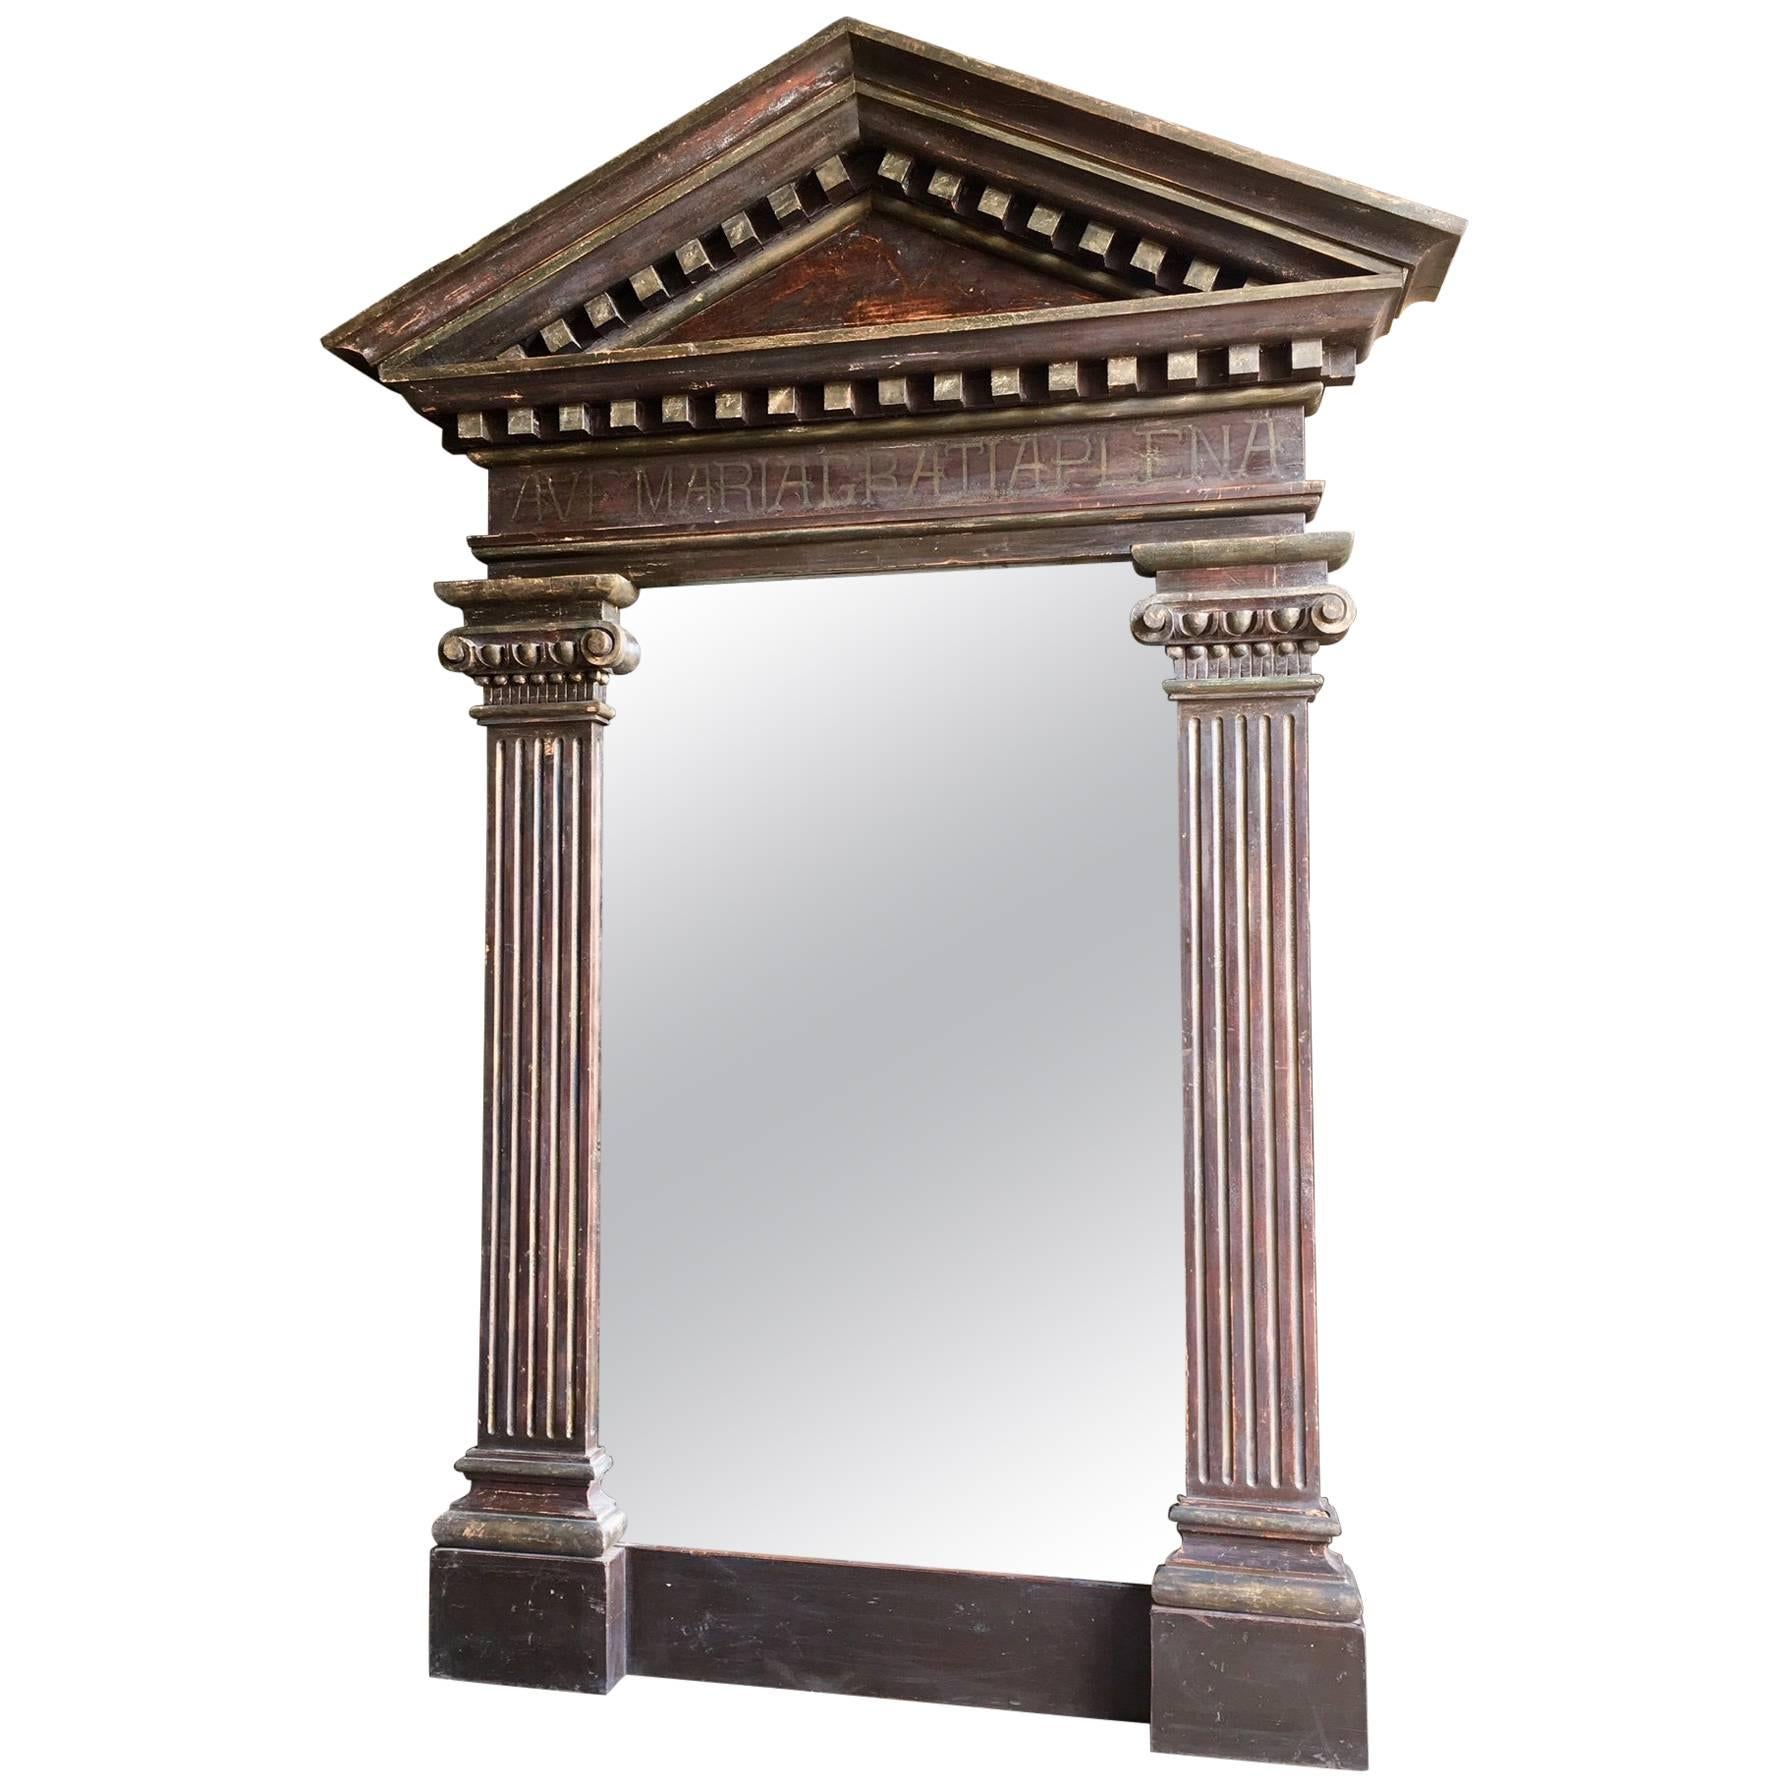 Very Large Mirror in Antique Decorative Architectural Frame For Sale